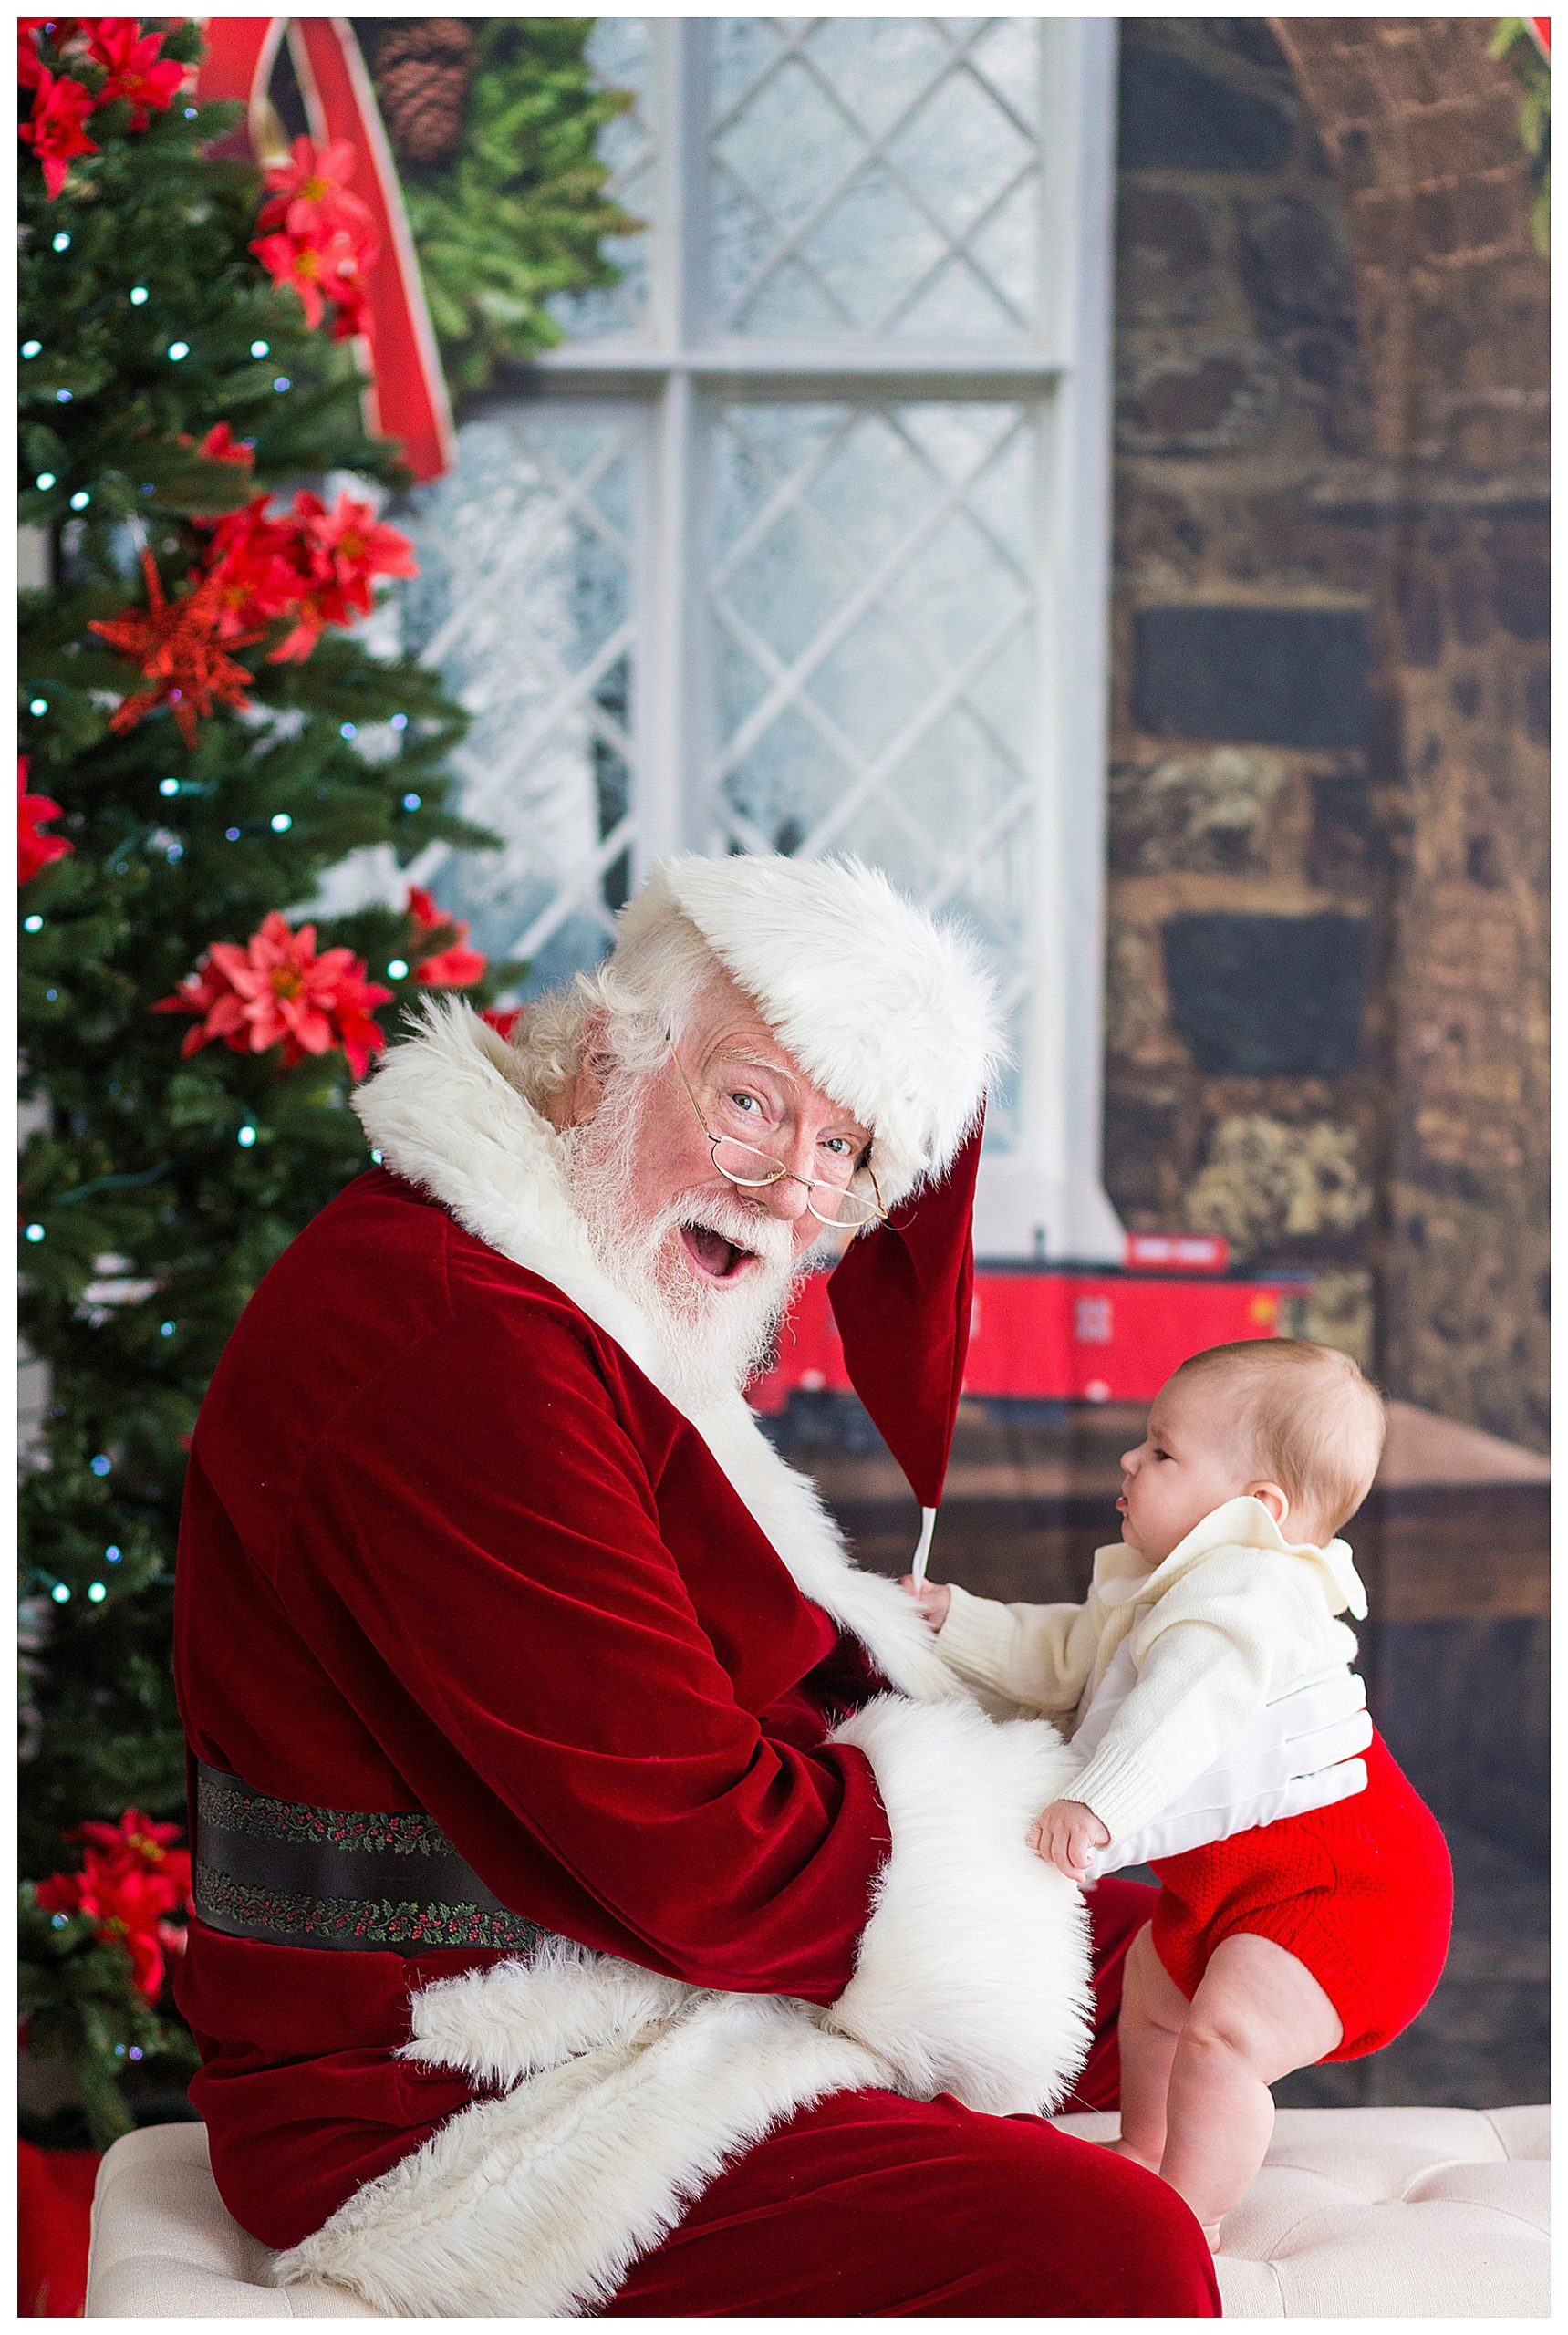 Santa holding a baby and looking at the camera with a shocked expression.